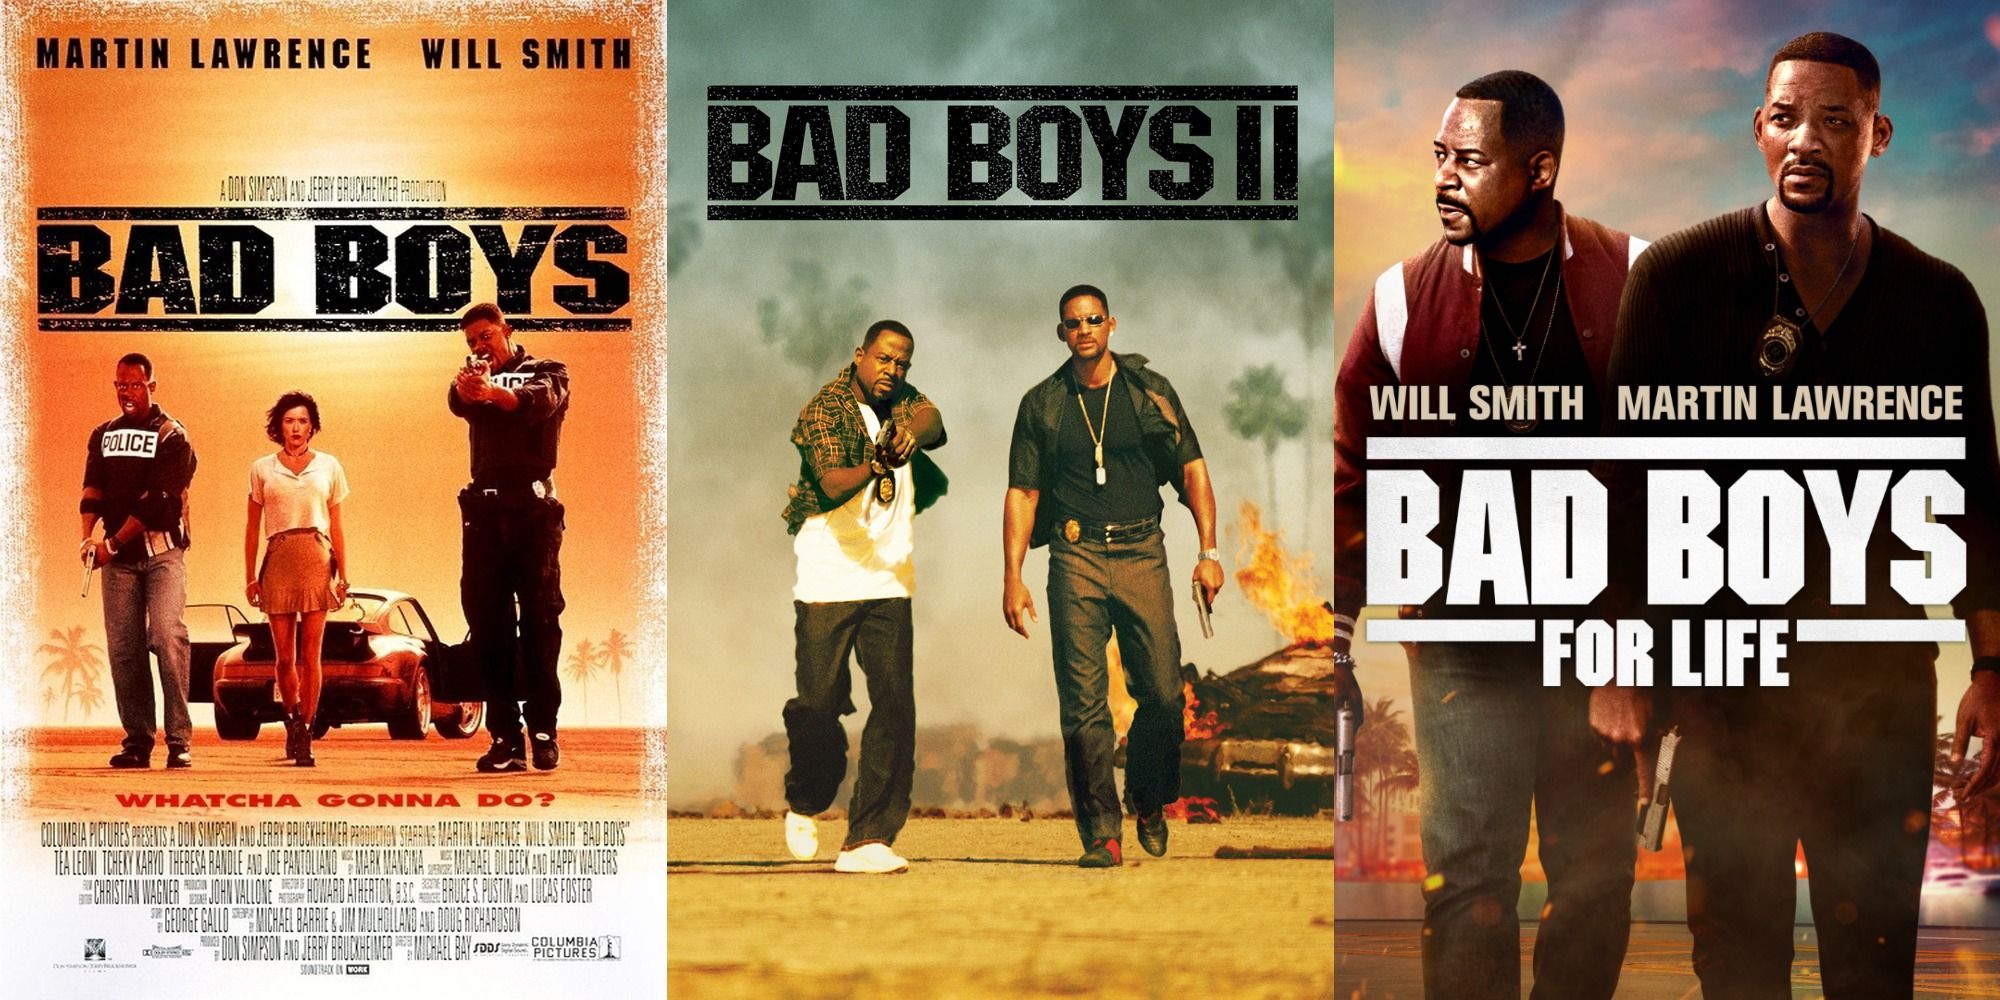 combined posters for Bad Boys 1, 2, 3 featuring Will Smith and Martin Lawrence